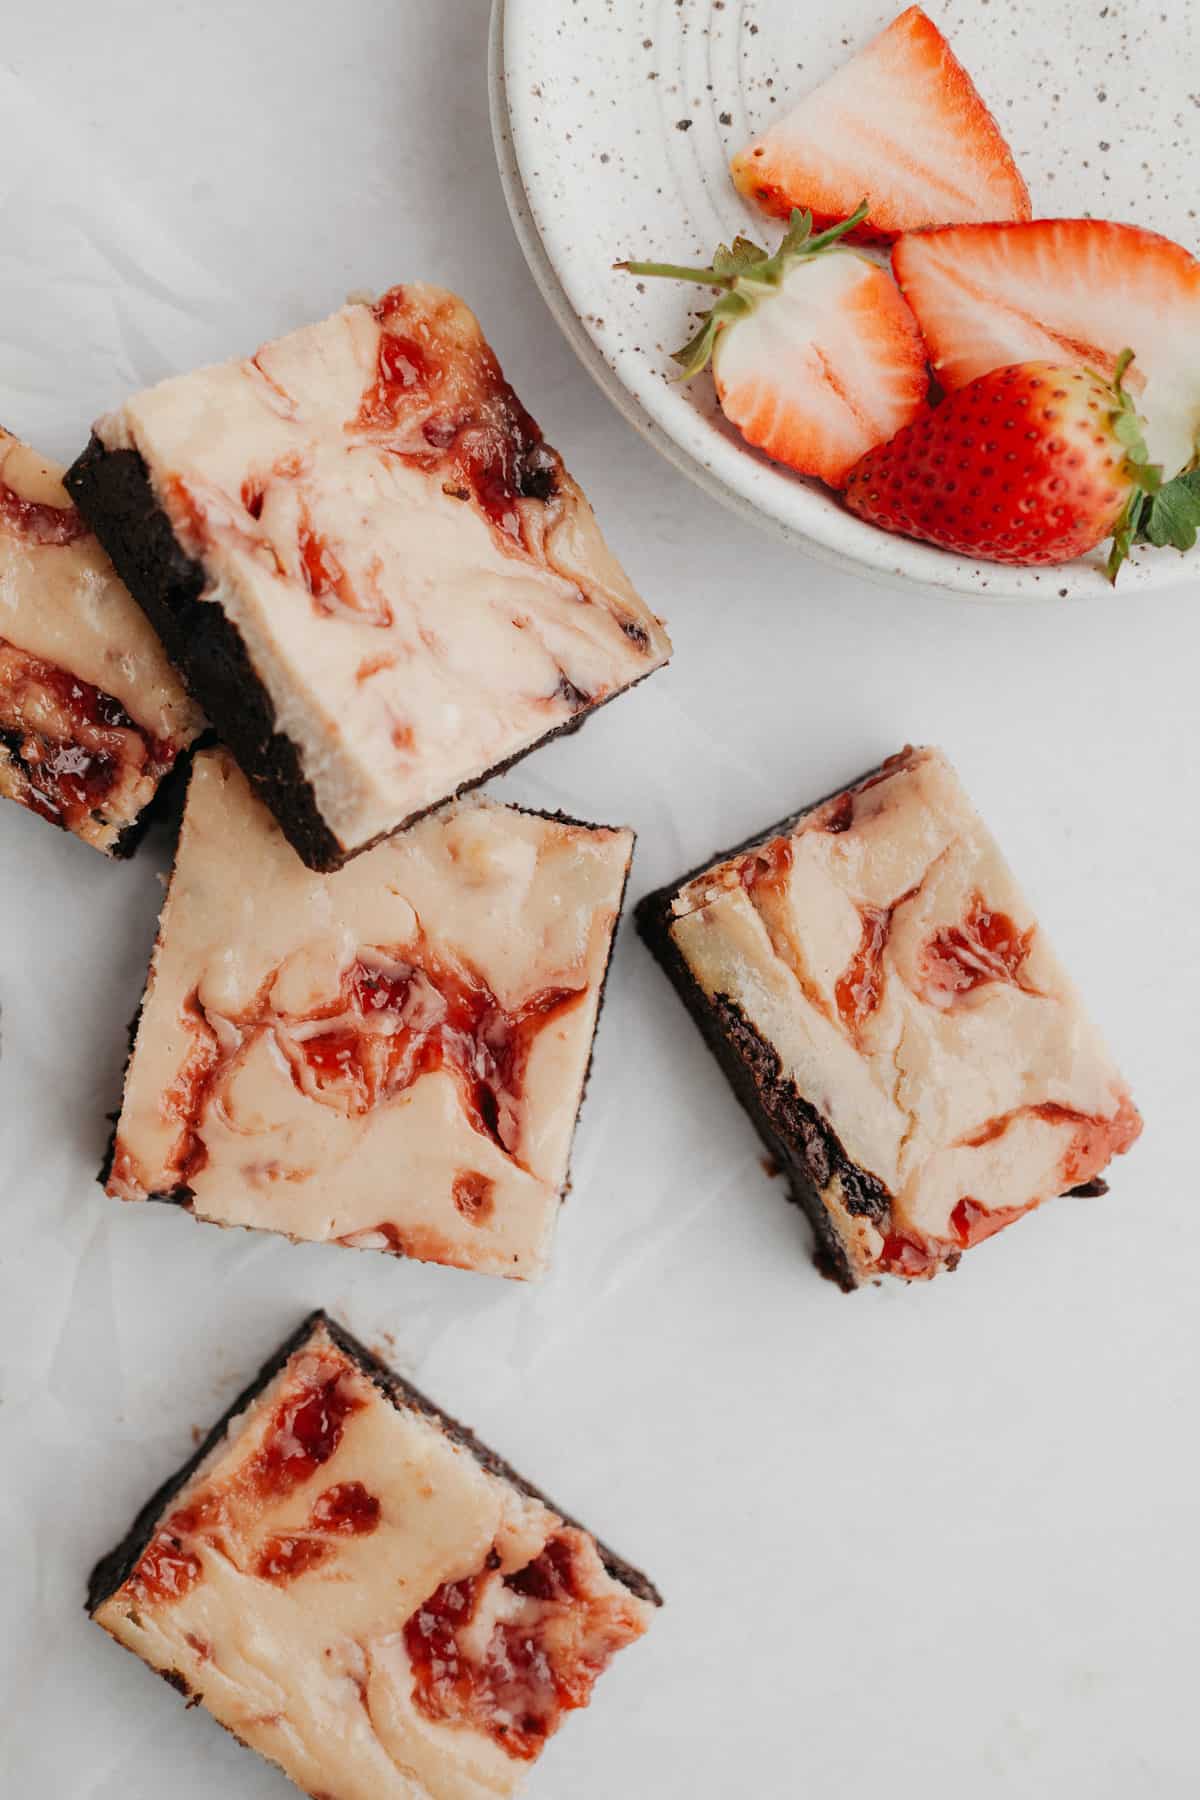 Several strawberry cheesecake brownies on parchment paper with several sliced strawberries on a grey plate.